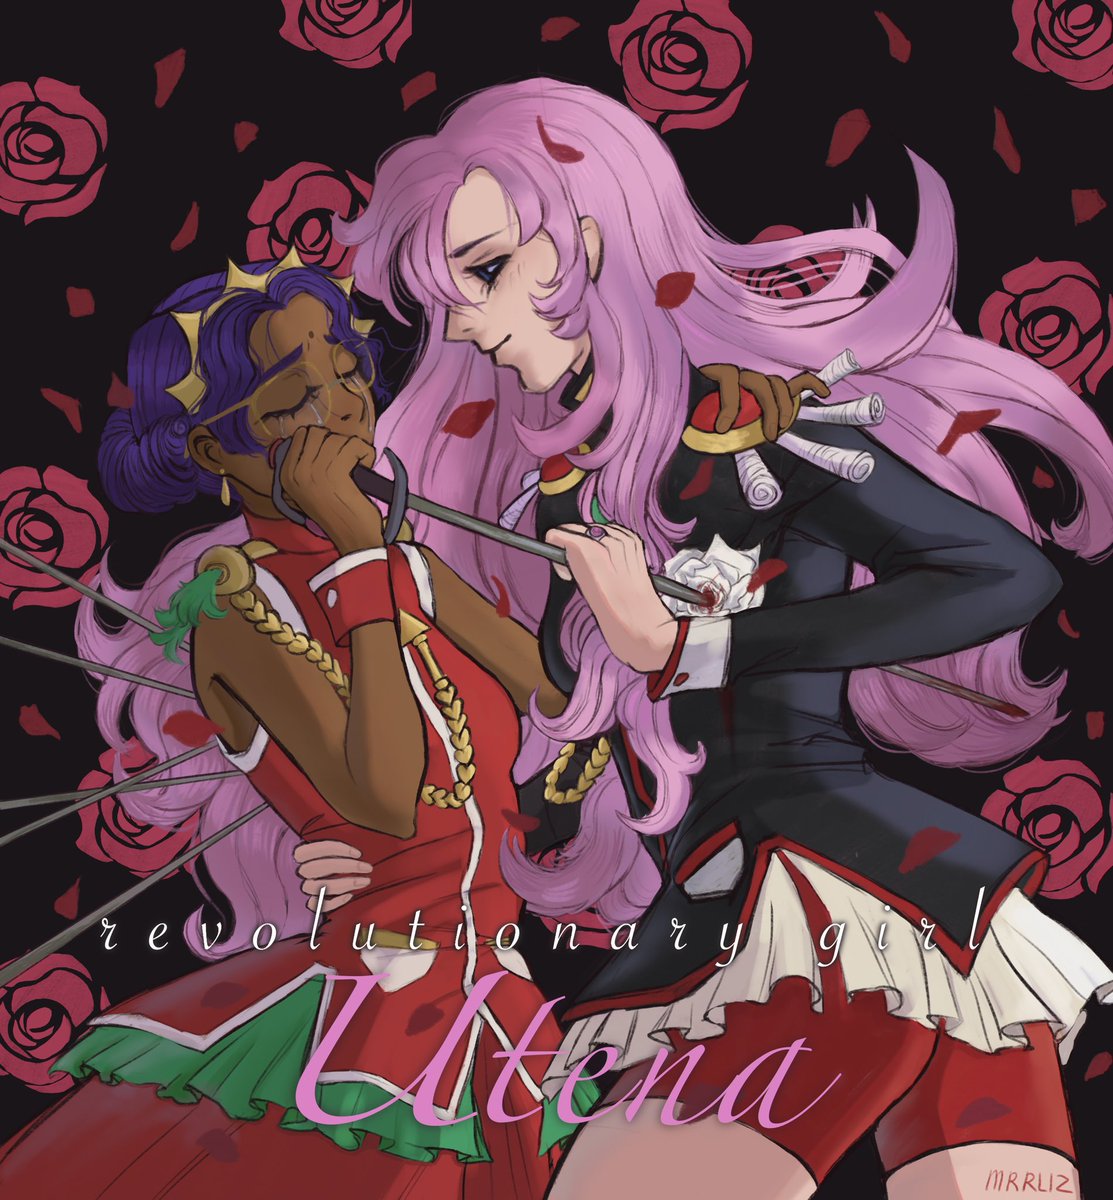 something something anthy runs a sword through utena because by not doing it she’d give up on everything she ever known (even if it’s hell) and utena forgives her anyway because it’s anthy 

#revolutionarygirlutena #utenanthy 
#украрт #絵描きさんと繋がりたい